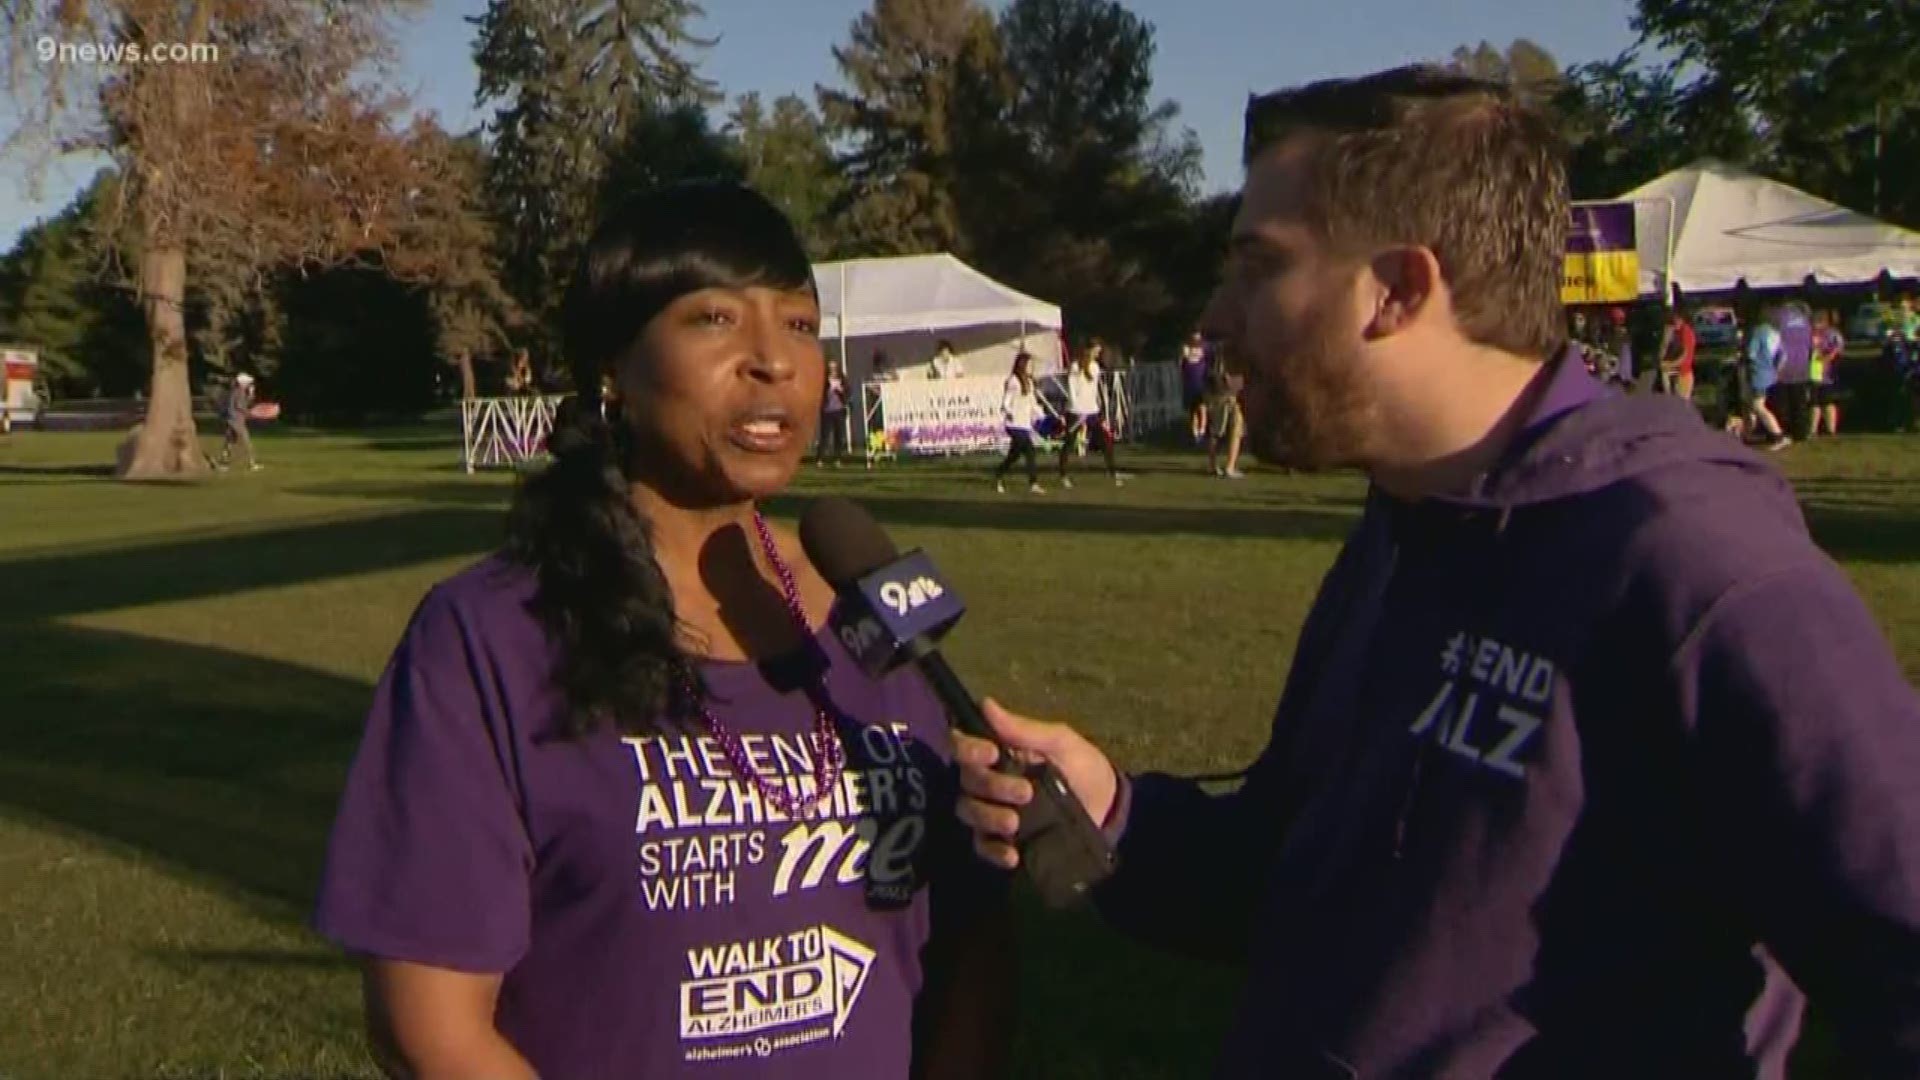 Annette Rucker joined us to talk about caring for her mother for 15 years after she was diagnosed with Alzheimer's.